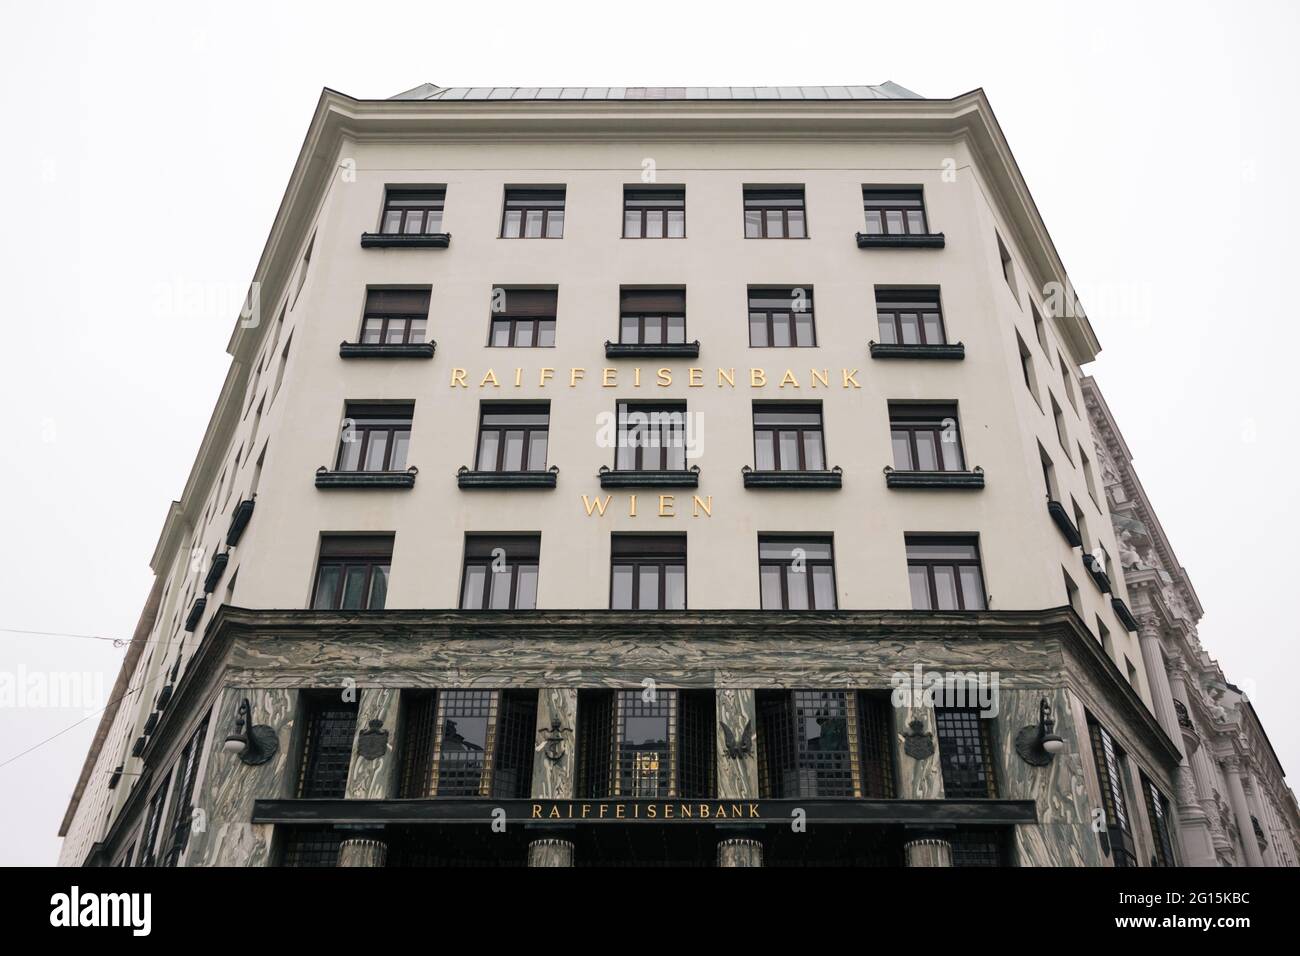 Vienna, Austria - Decembter 19 2020: Looshaus or Loos Haus, a Town House designed by Modernist Architect Adolf Loos, now used by Raiffeisen Bank Wien. Stock Photo